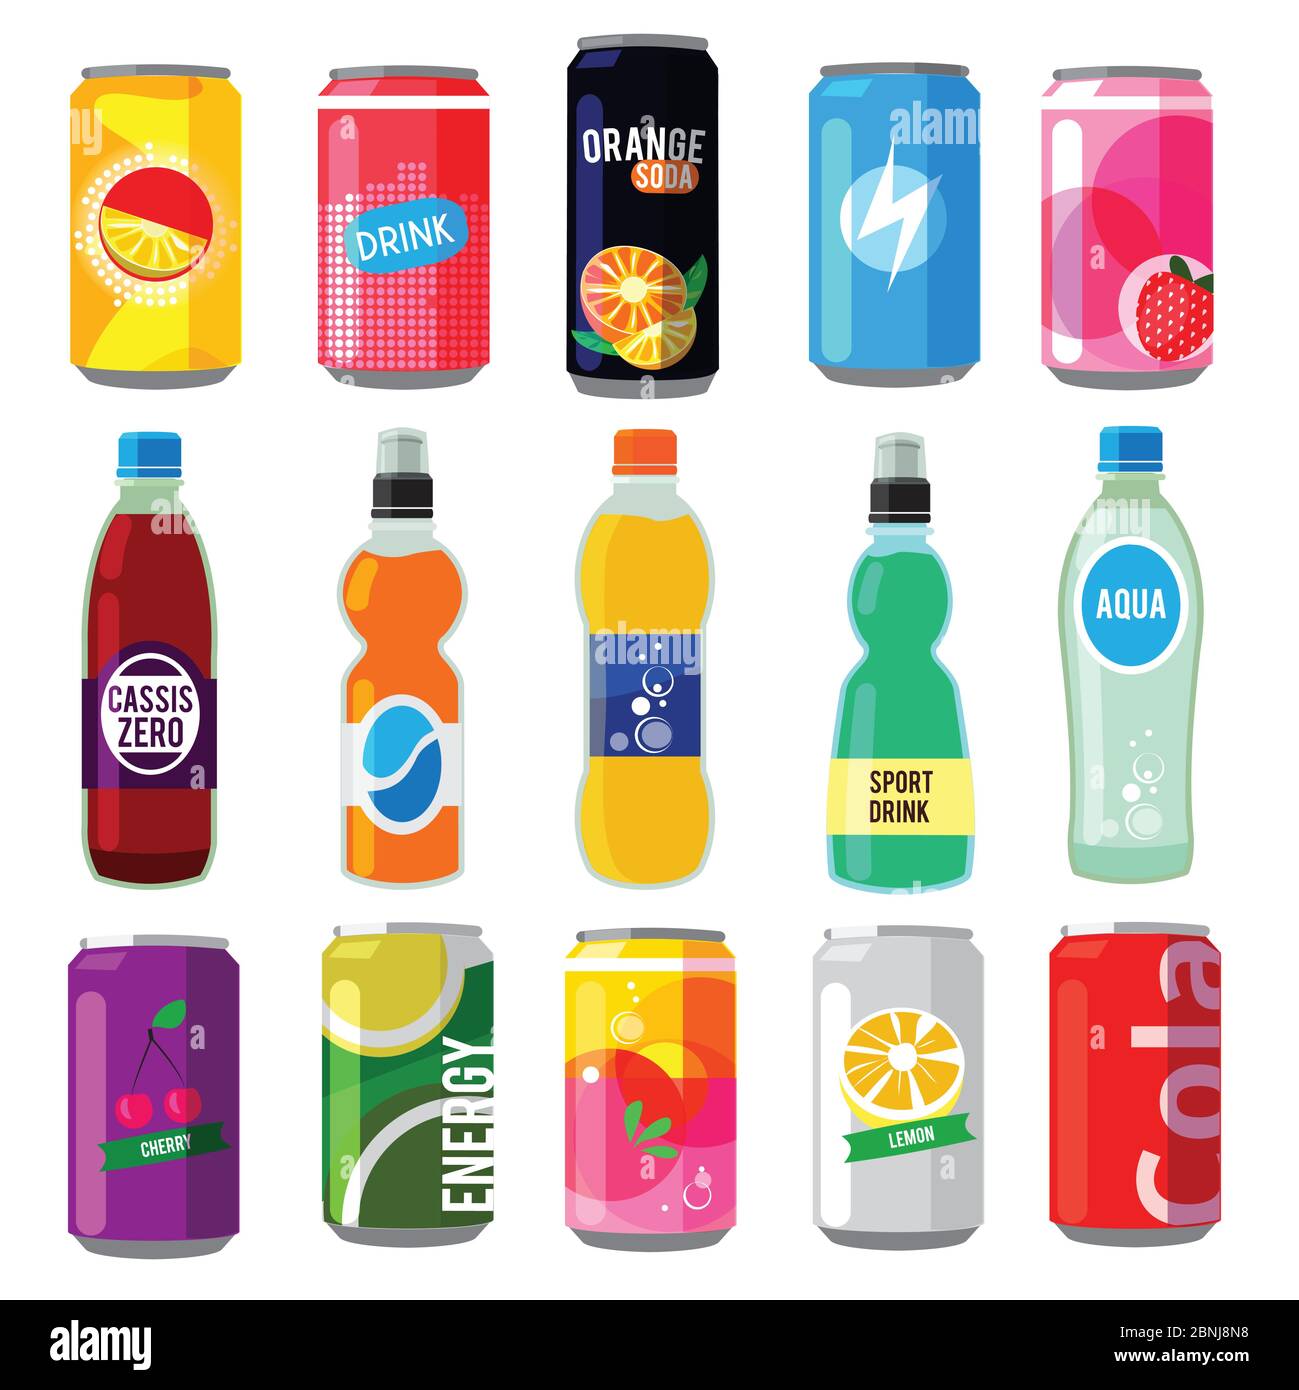 Fizzy drinks in glass bottles. Colored vector pictures Stock Vector